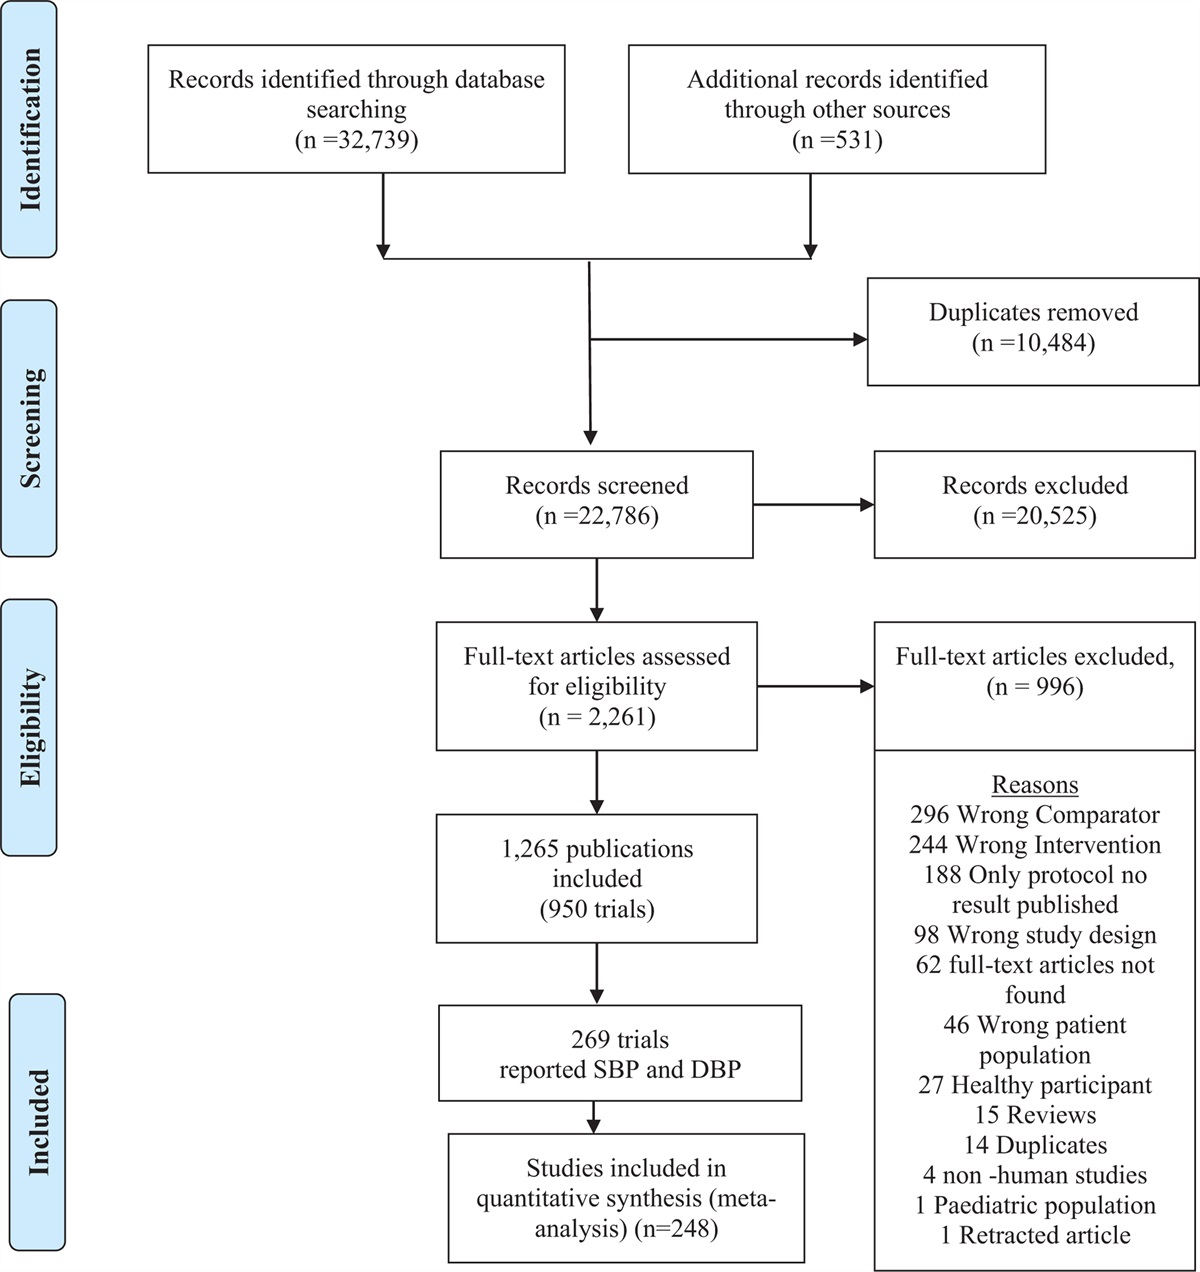 Effects of adding exercise to usual care on blood pressure in patients with hypertension, type 2 diabetes, or cardiovascular disease: a systematic review with meta-analysis and trial sequential analysis